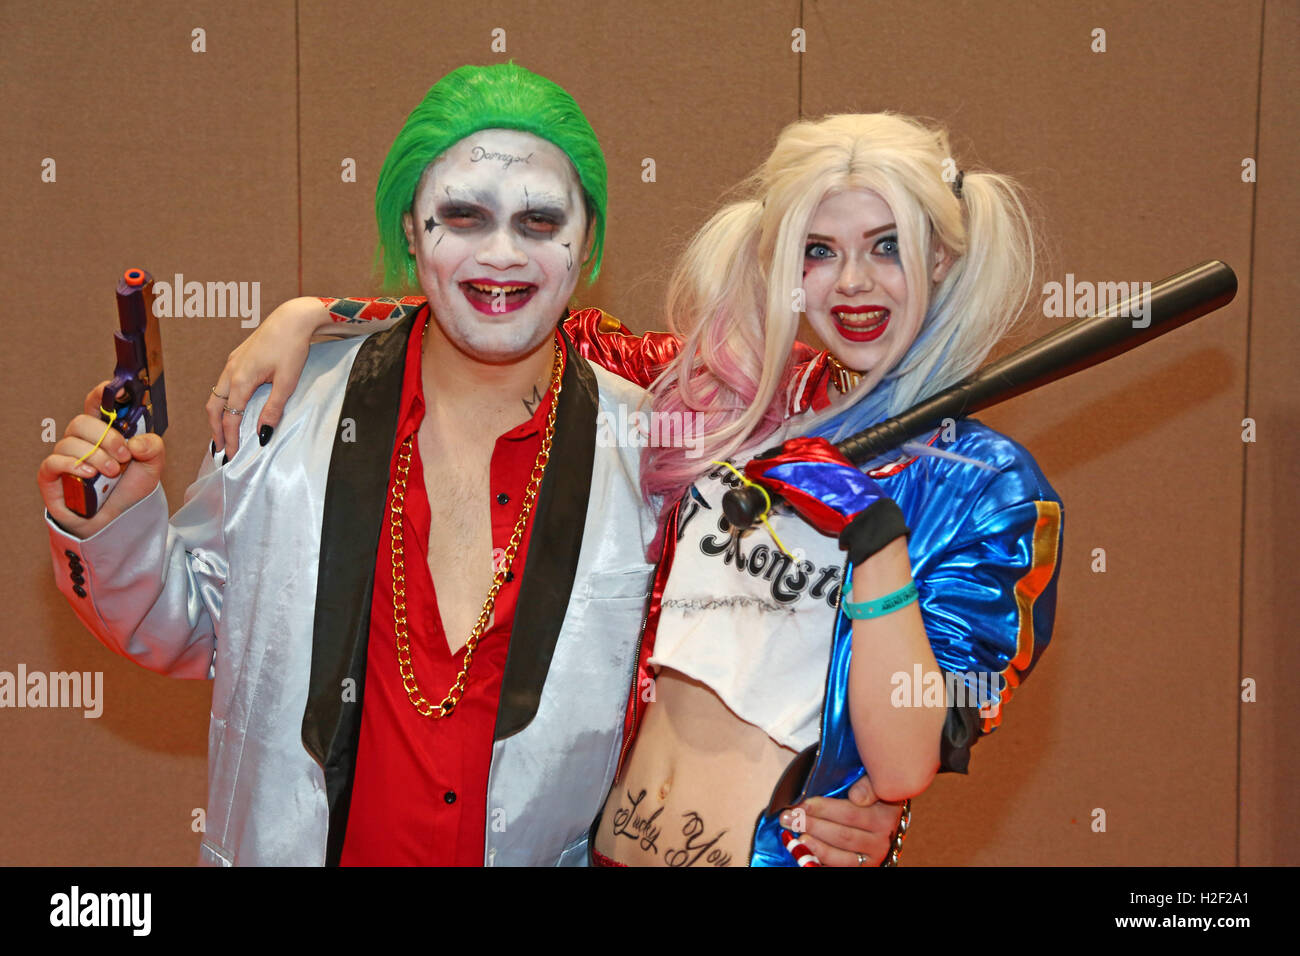 London, UK. 28th October 2016. Participants dressed as the Joker and Harley Quinn at MCM London Comic Con at Excel London a modern pop culture event where people can meet stars of film and TV and dress up in costume as their favourite characters from film,, TV, manga and anime, also known as cosplay Credit:  Paul Brown/Alamy Live News Stock Photo